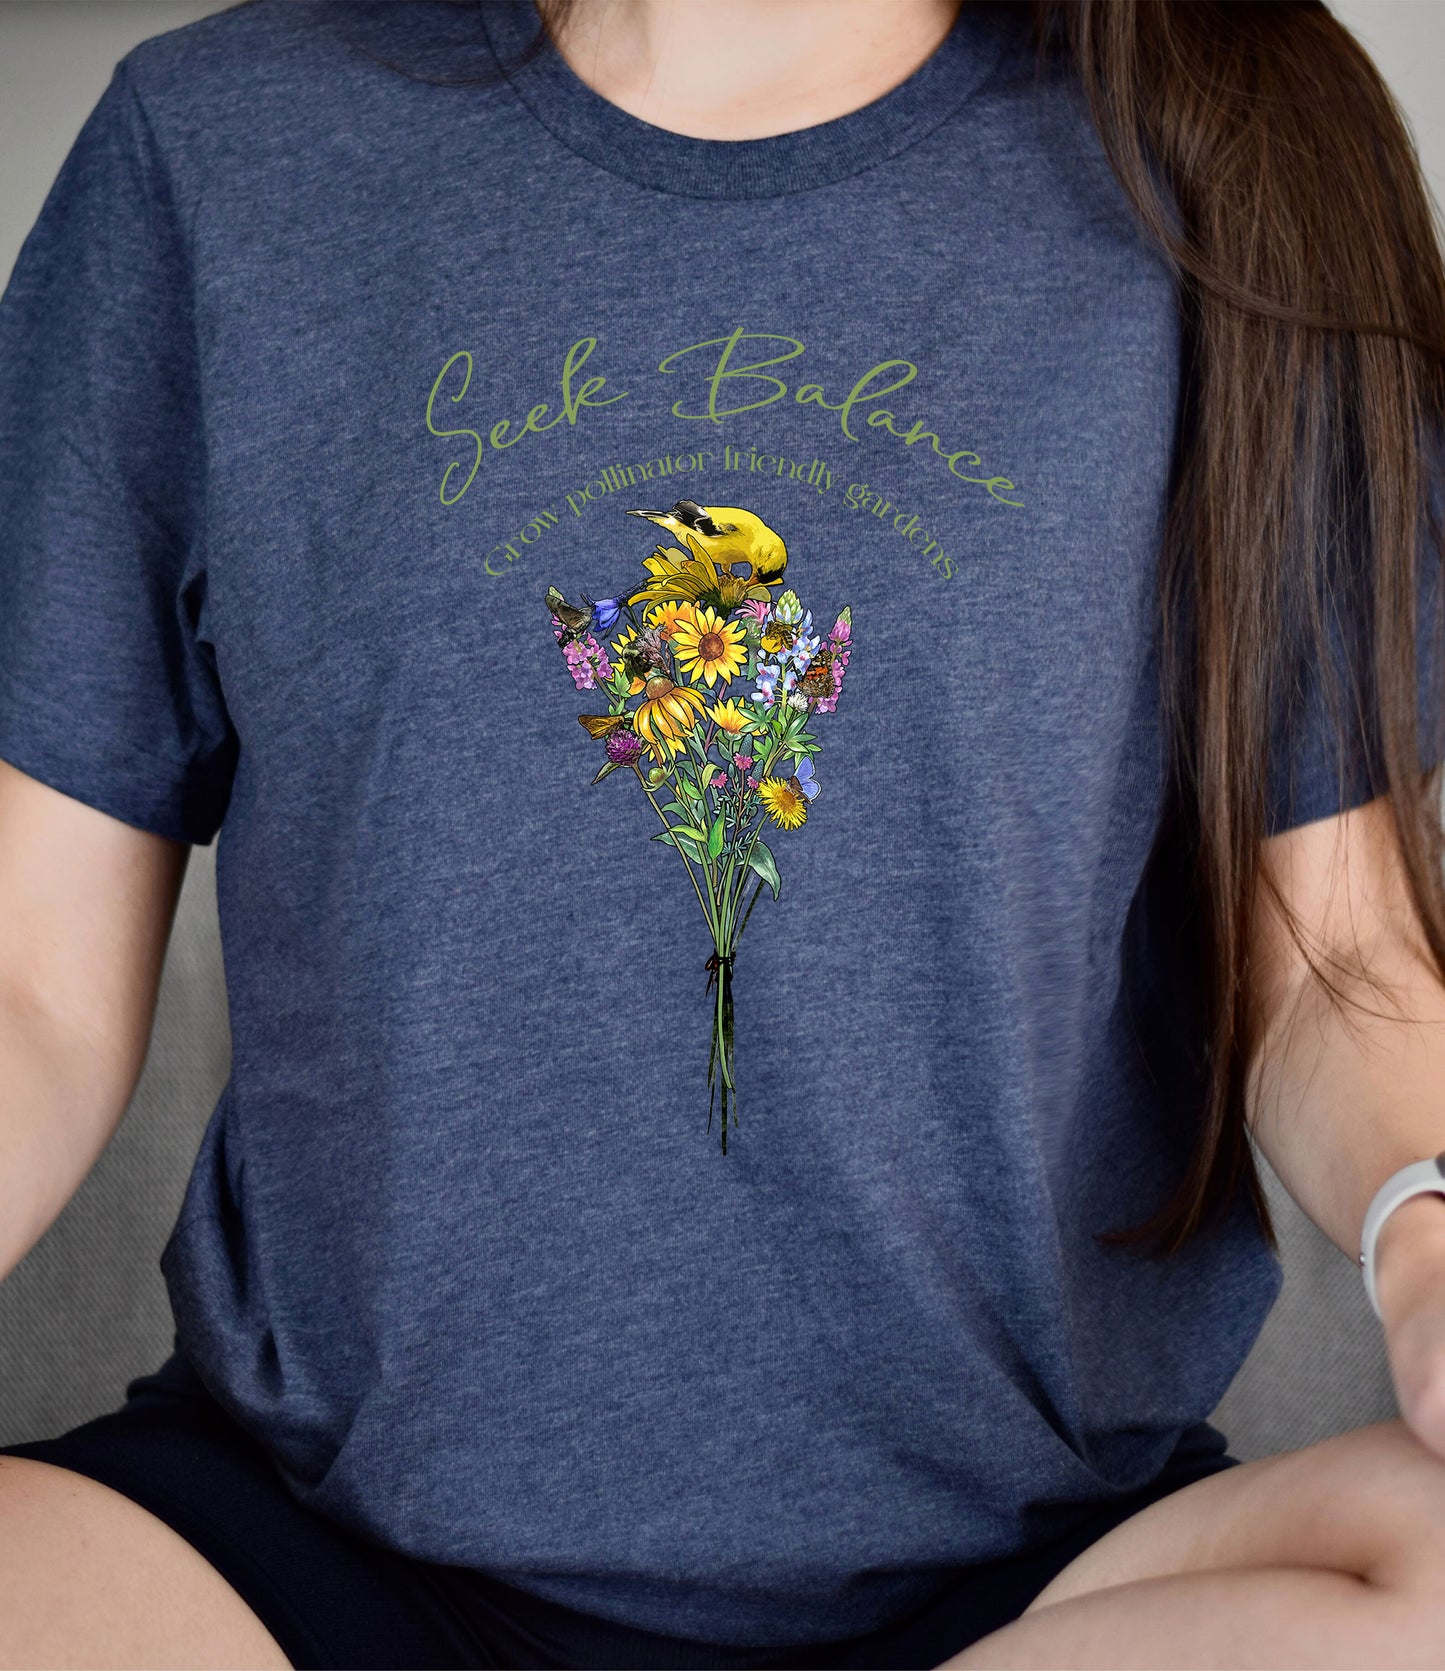 Friendly pollinators native plant short sleeve tee, gardener's gift, plant lover, save the bees, entomologist, ecology, conservation,